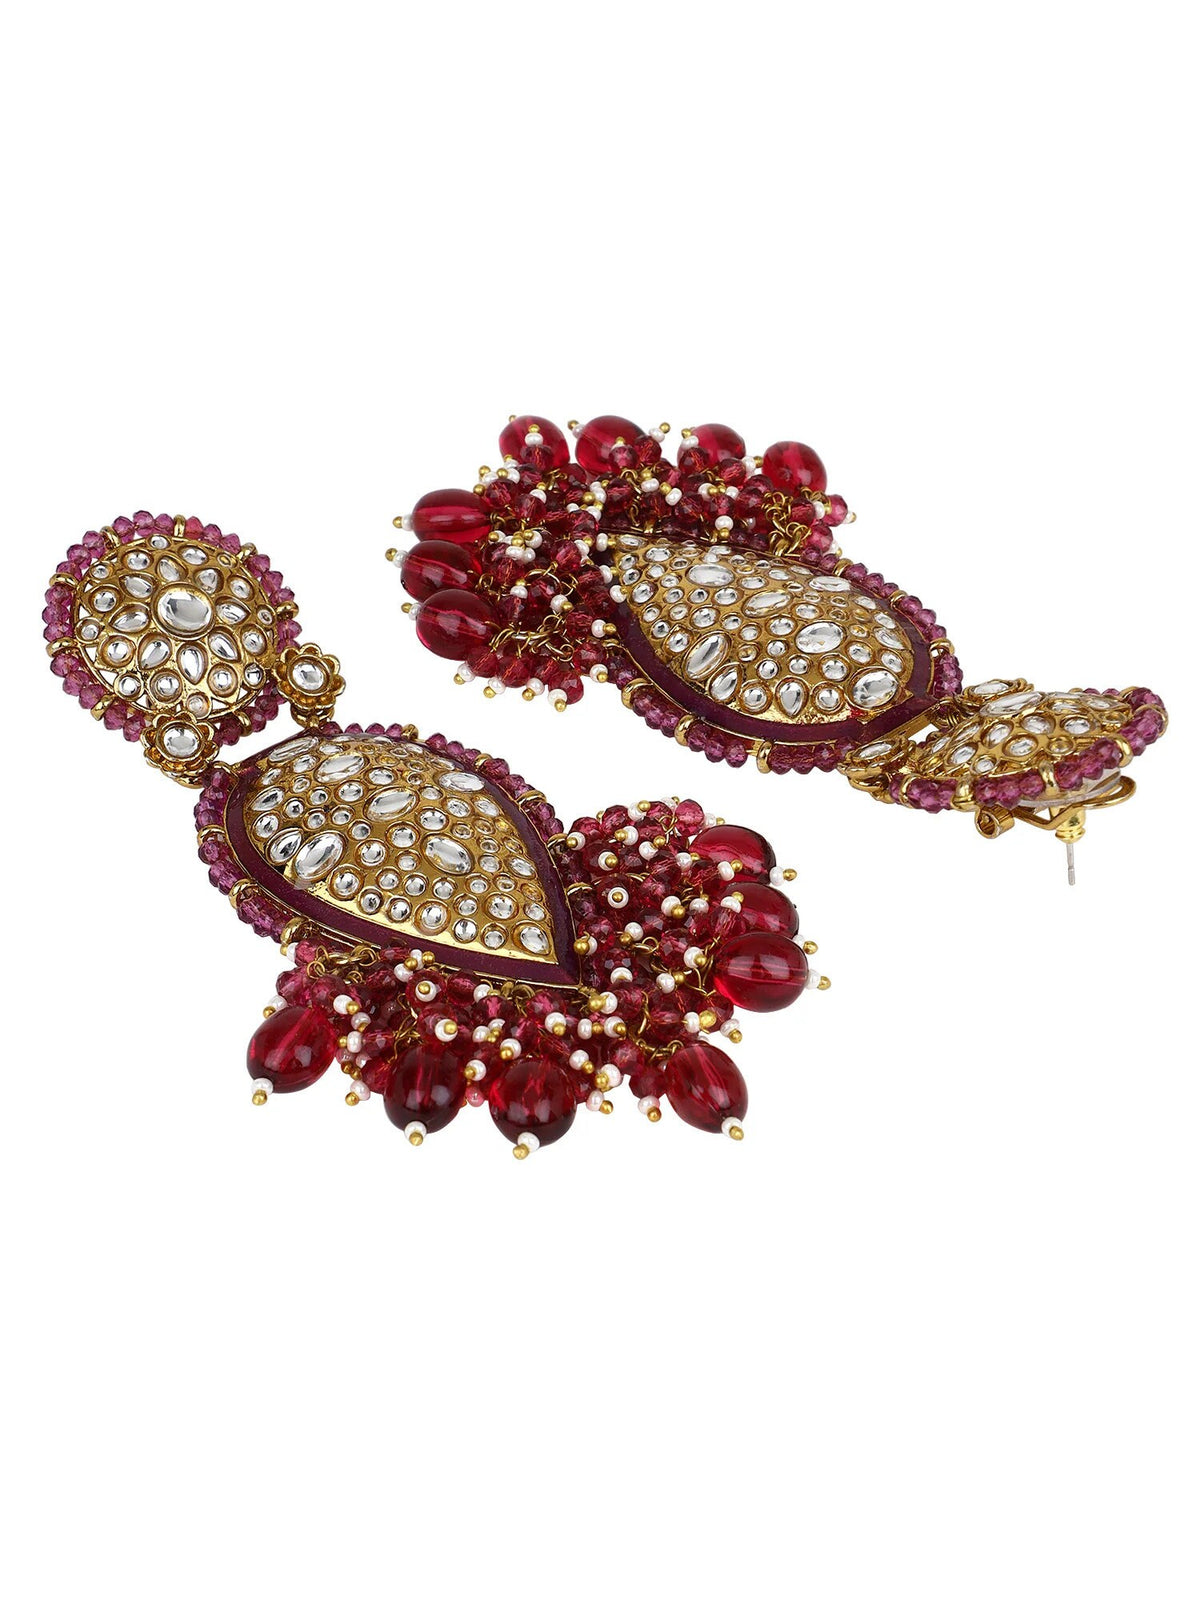 Jhumka earrings pearl kundan, Indian Earrings Gold Plated Traditional Indian Jewelry | Bollywood Jewelry | Gifts for Her